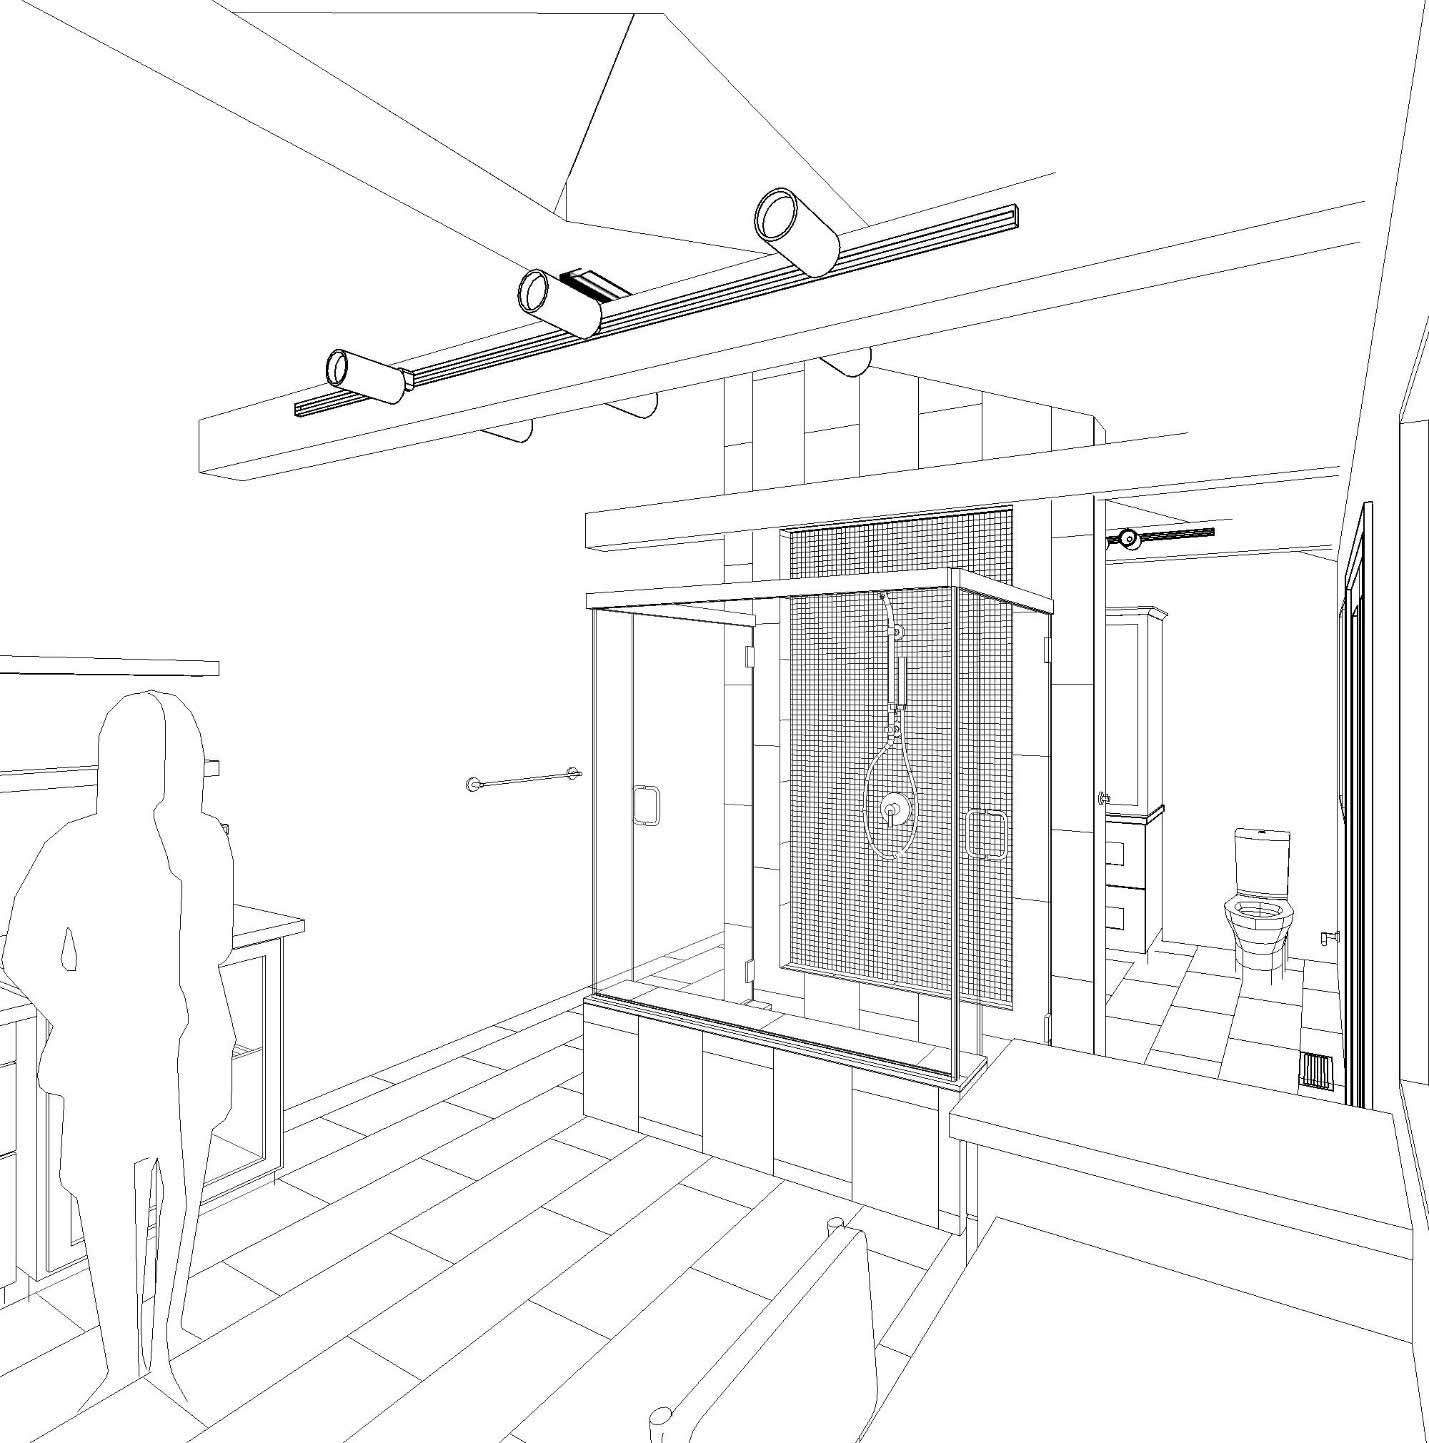 rendering of bathroom designed by Silent Rivers of Des Moines has vaulted ceiling, skylights, and 3-sided shower